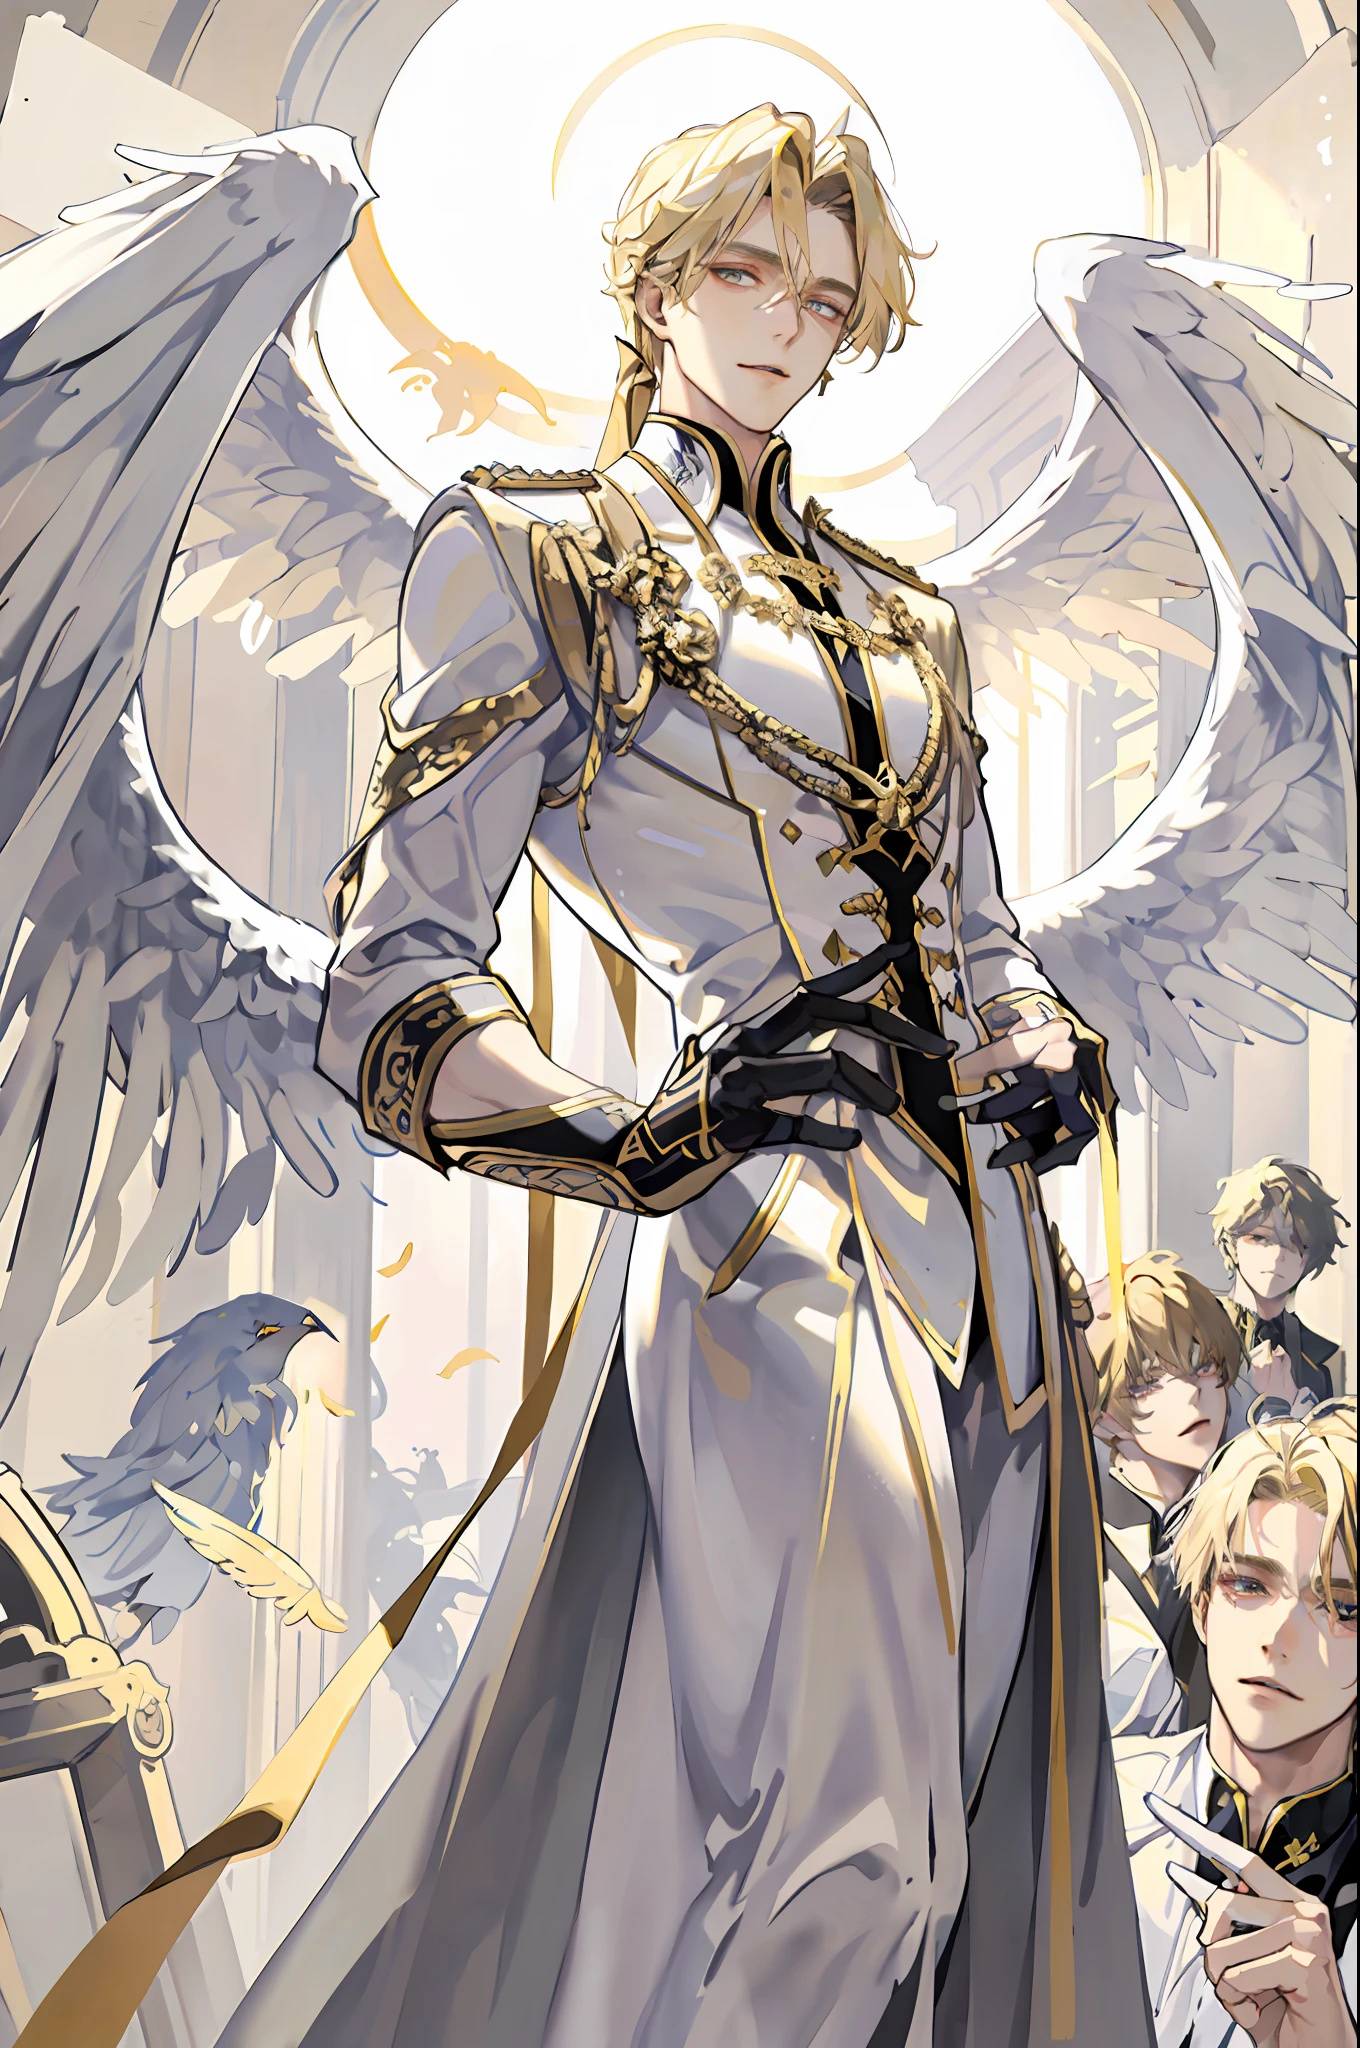 ((masterpiece, best quality)), 1guy, fallen angel Lucifer, very handsome, blonde and medium hair, thin, huge and beautiful wings on the back, in white clothes, evil expression, looking at the viewer, golden clouds in the background